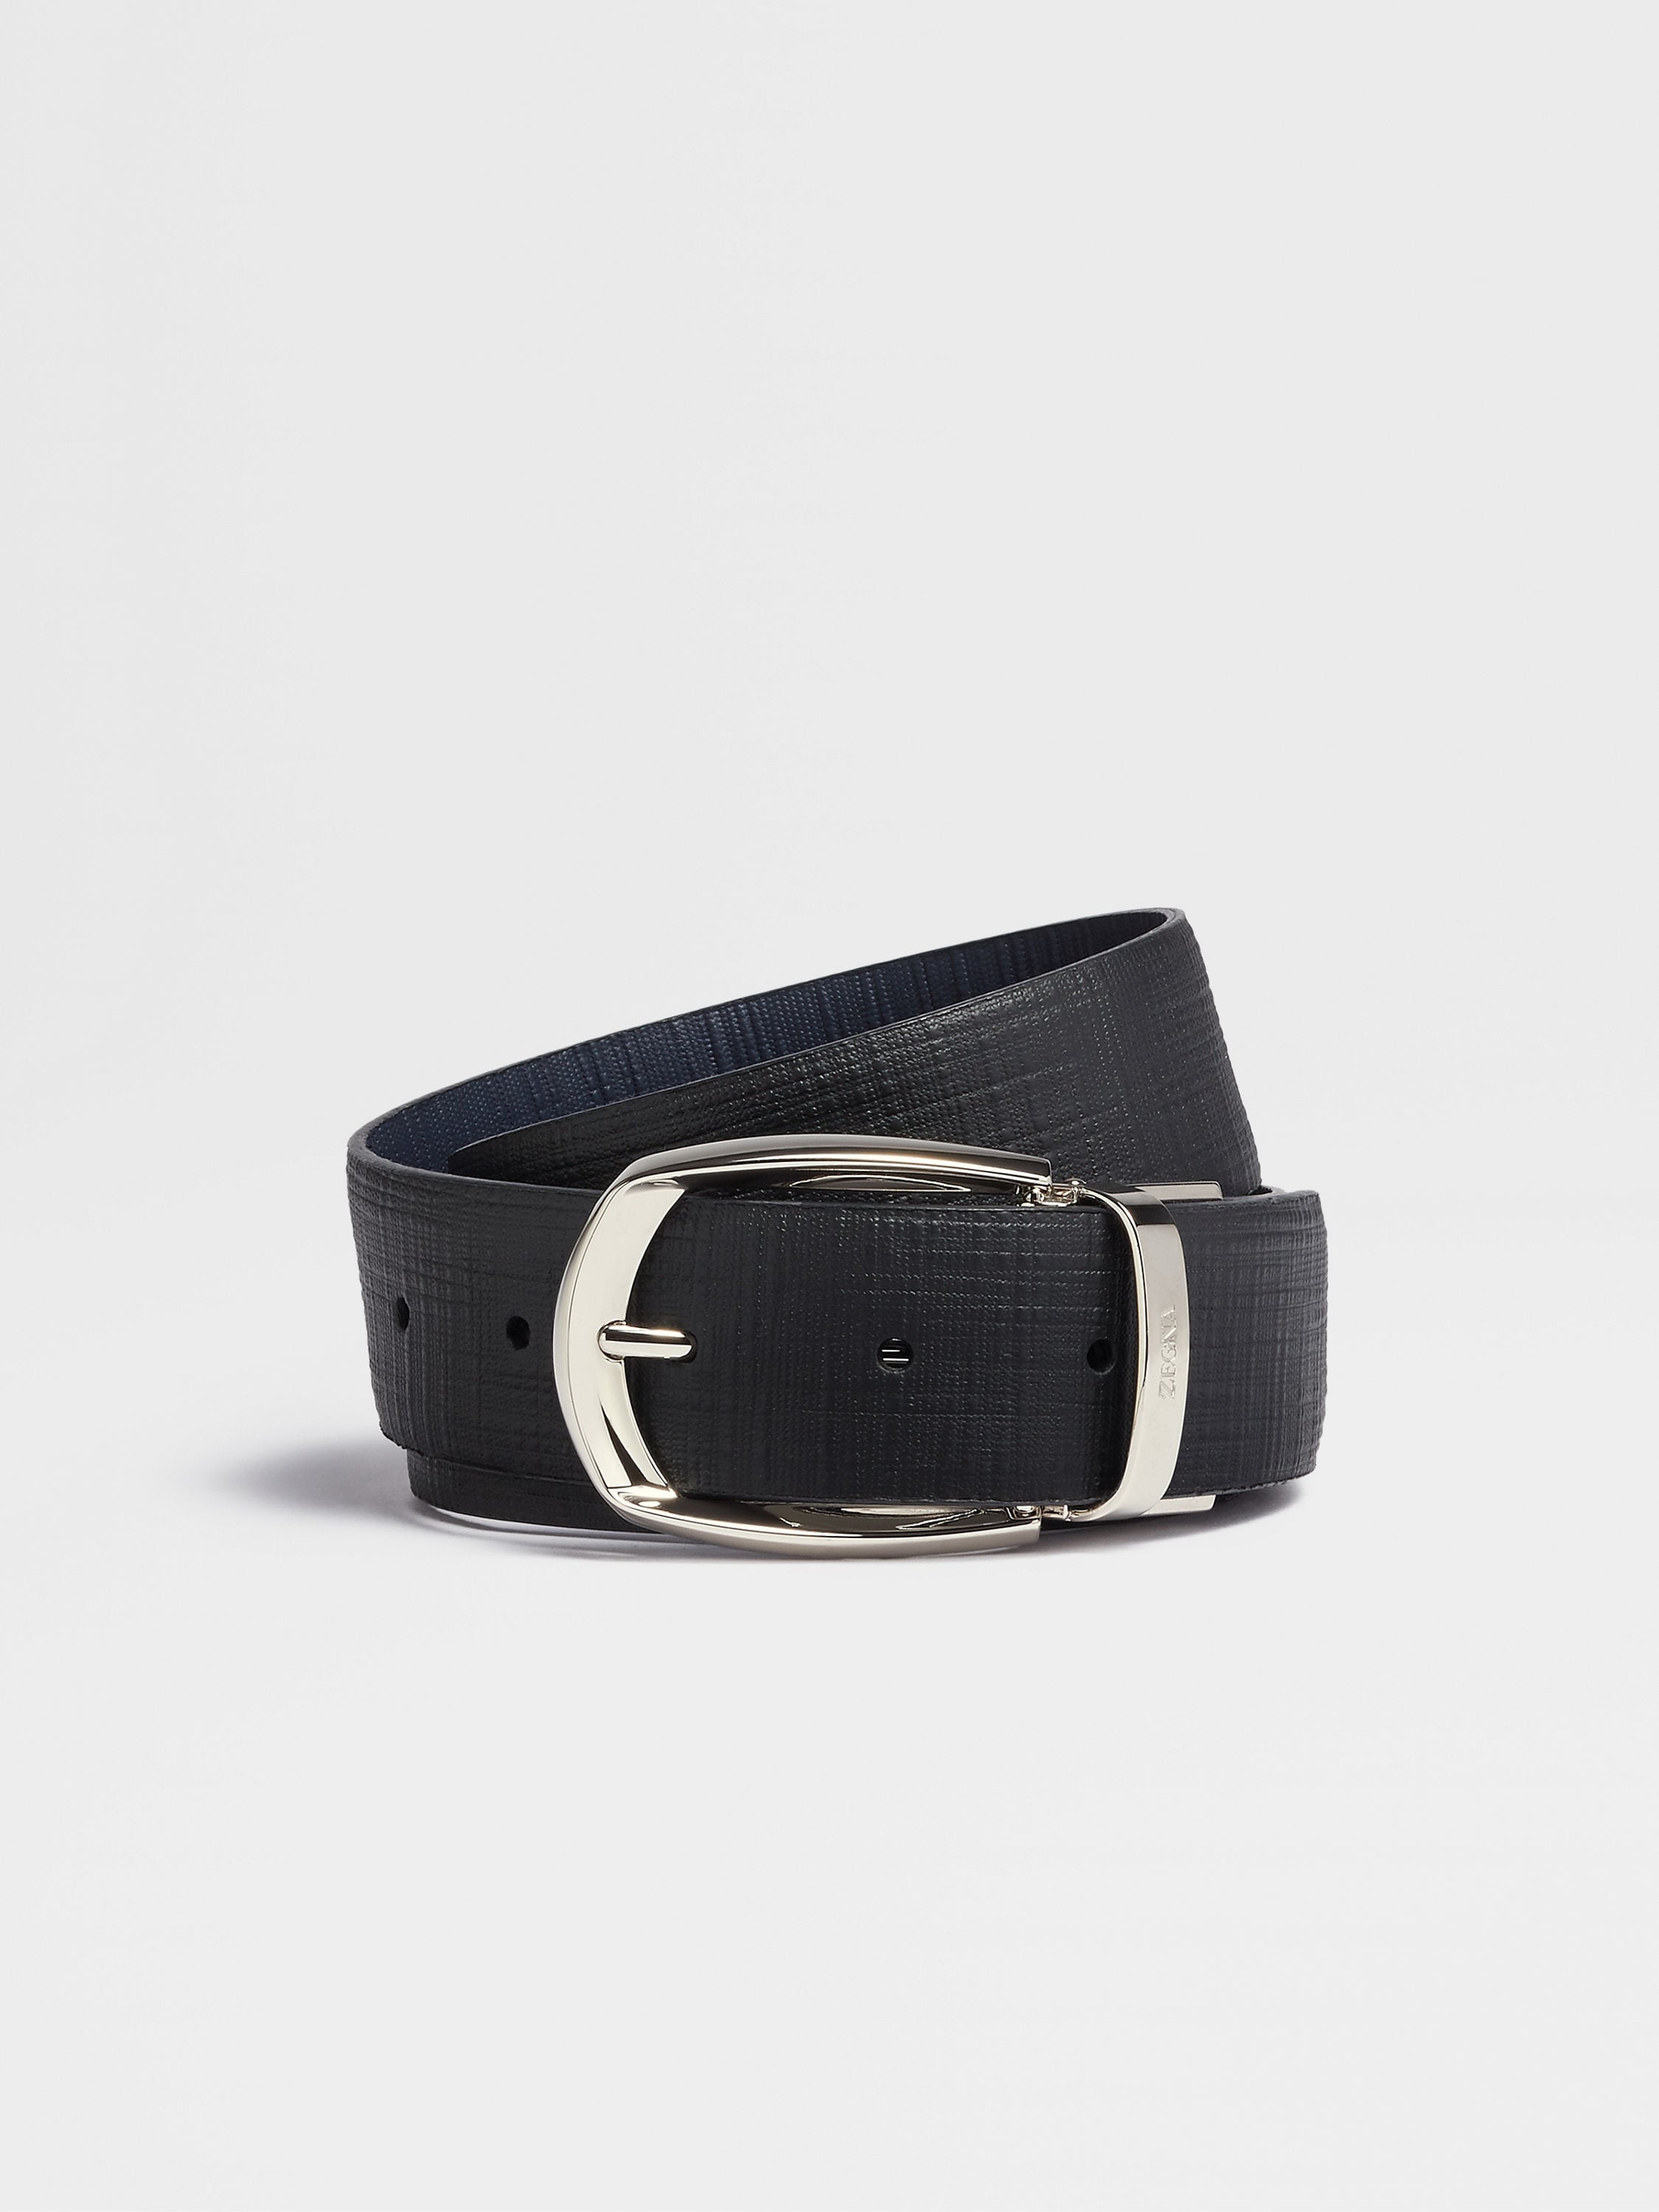 Black and Navy Blue Reversible Leather Belt